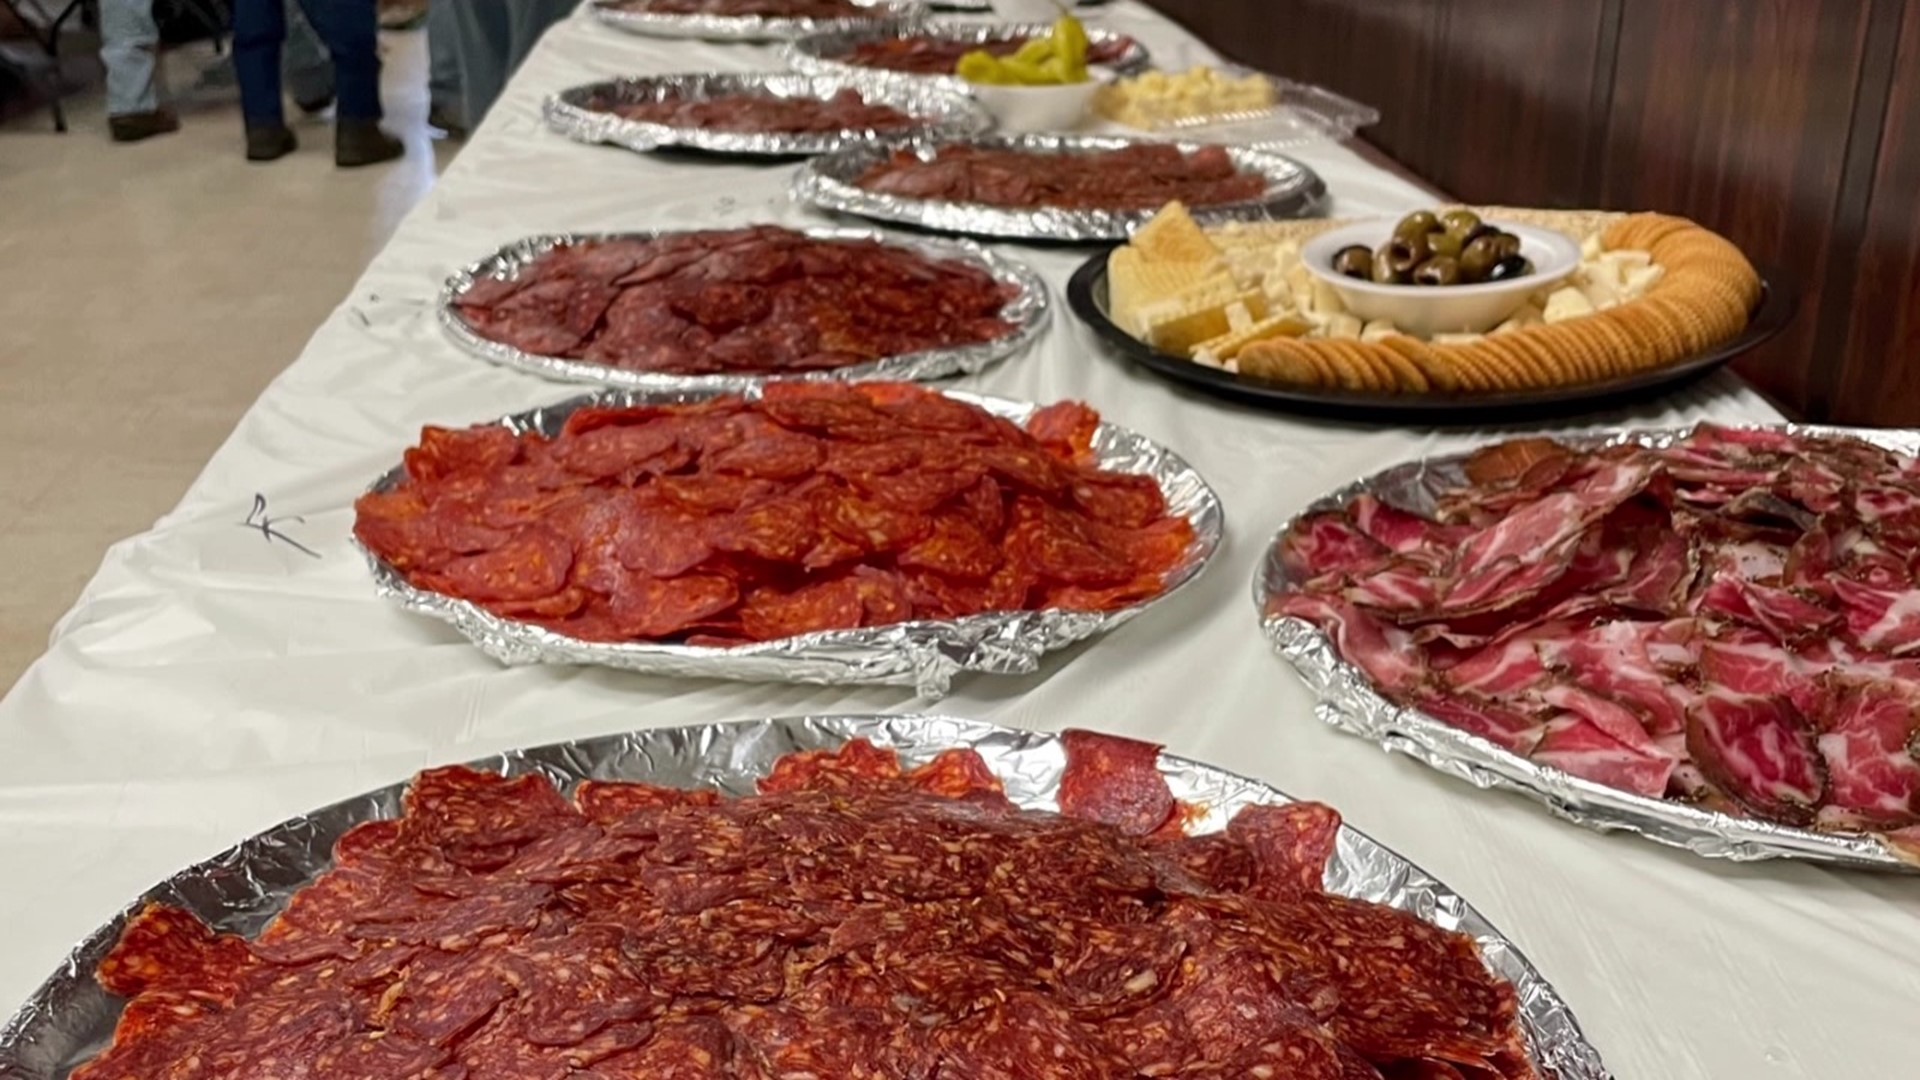 Twenty-five people submitted their cured meats for judging.